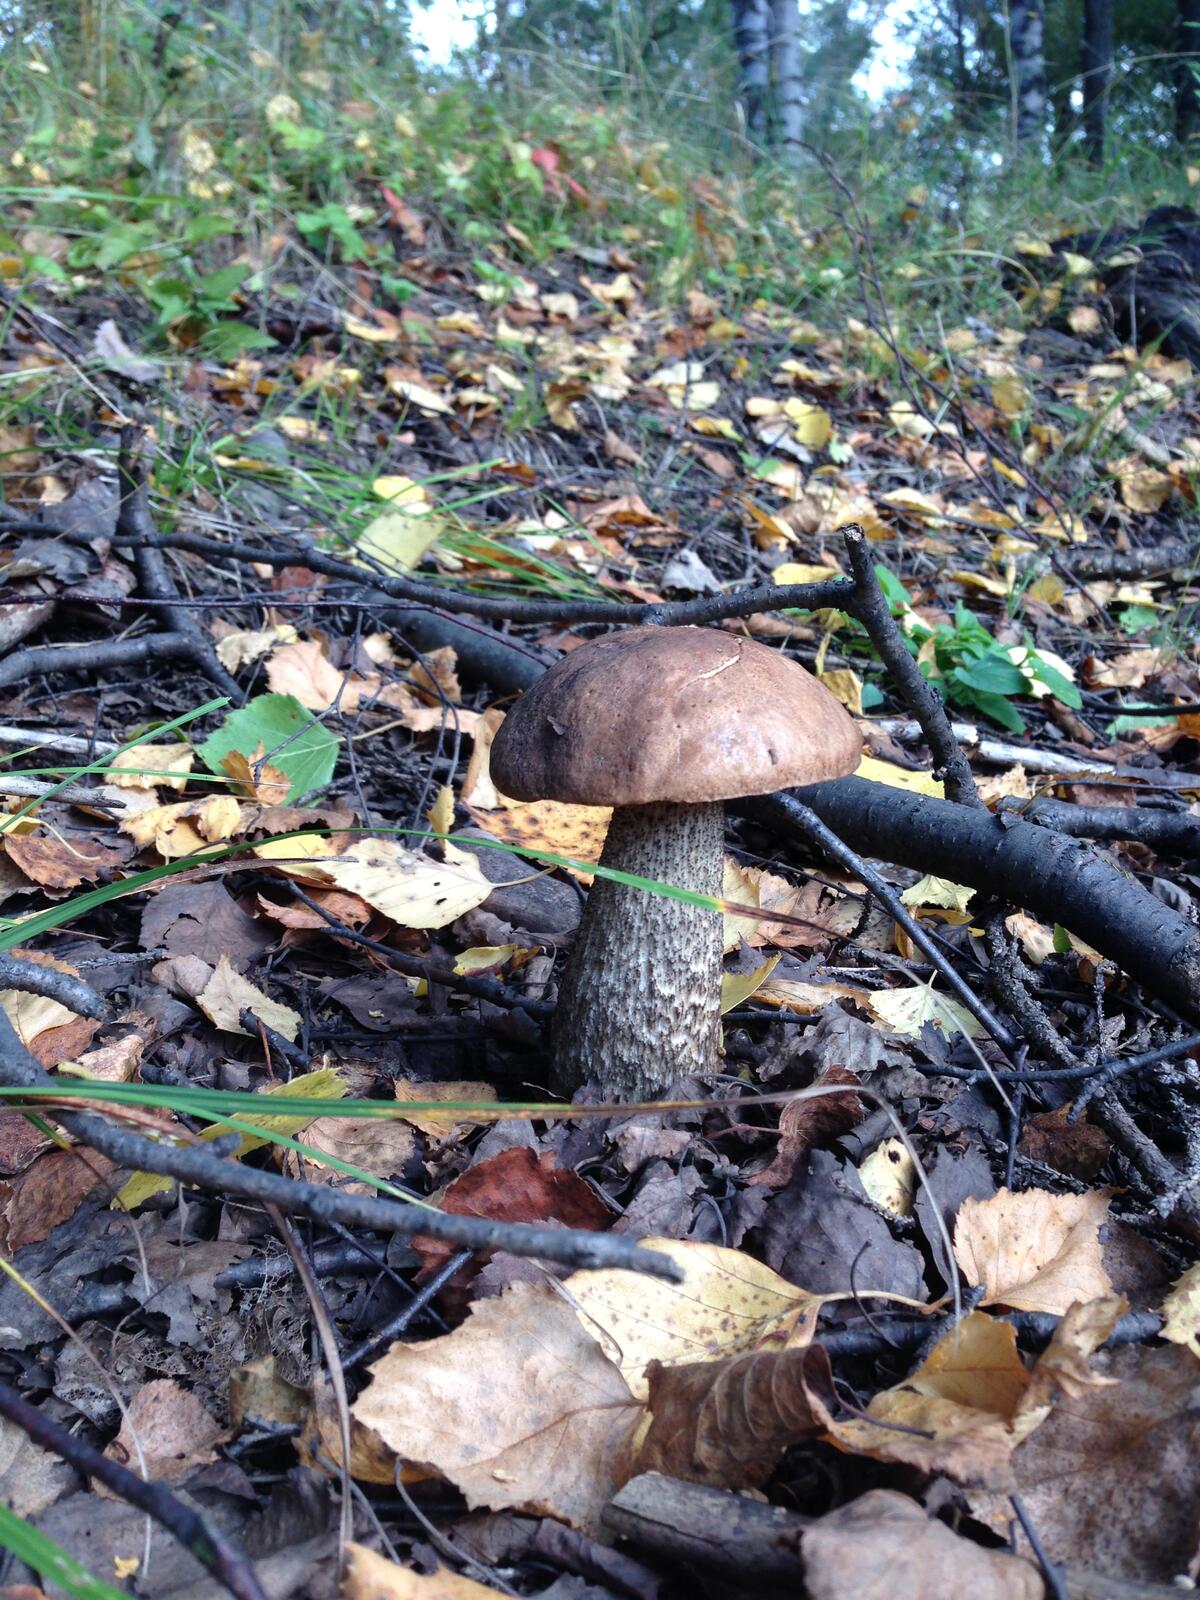 A mushroom in the fall forest